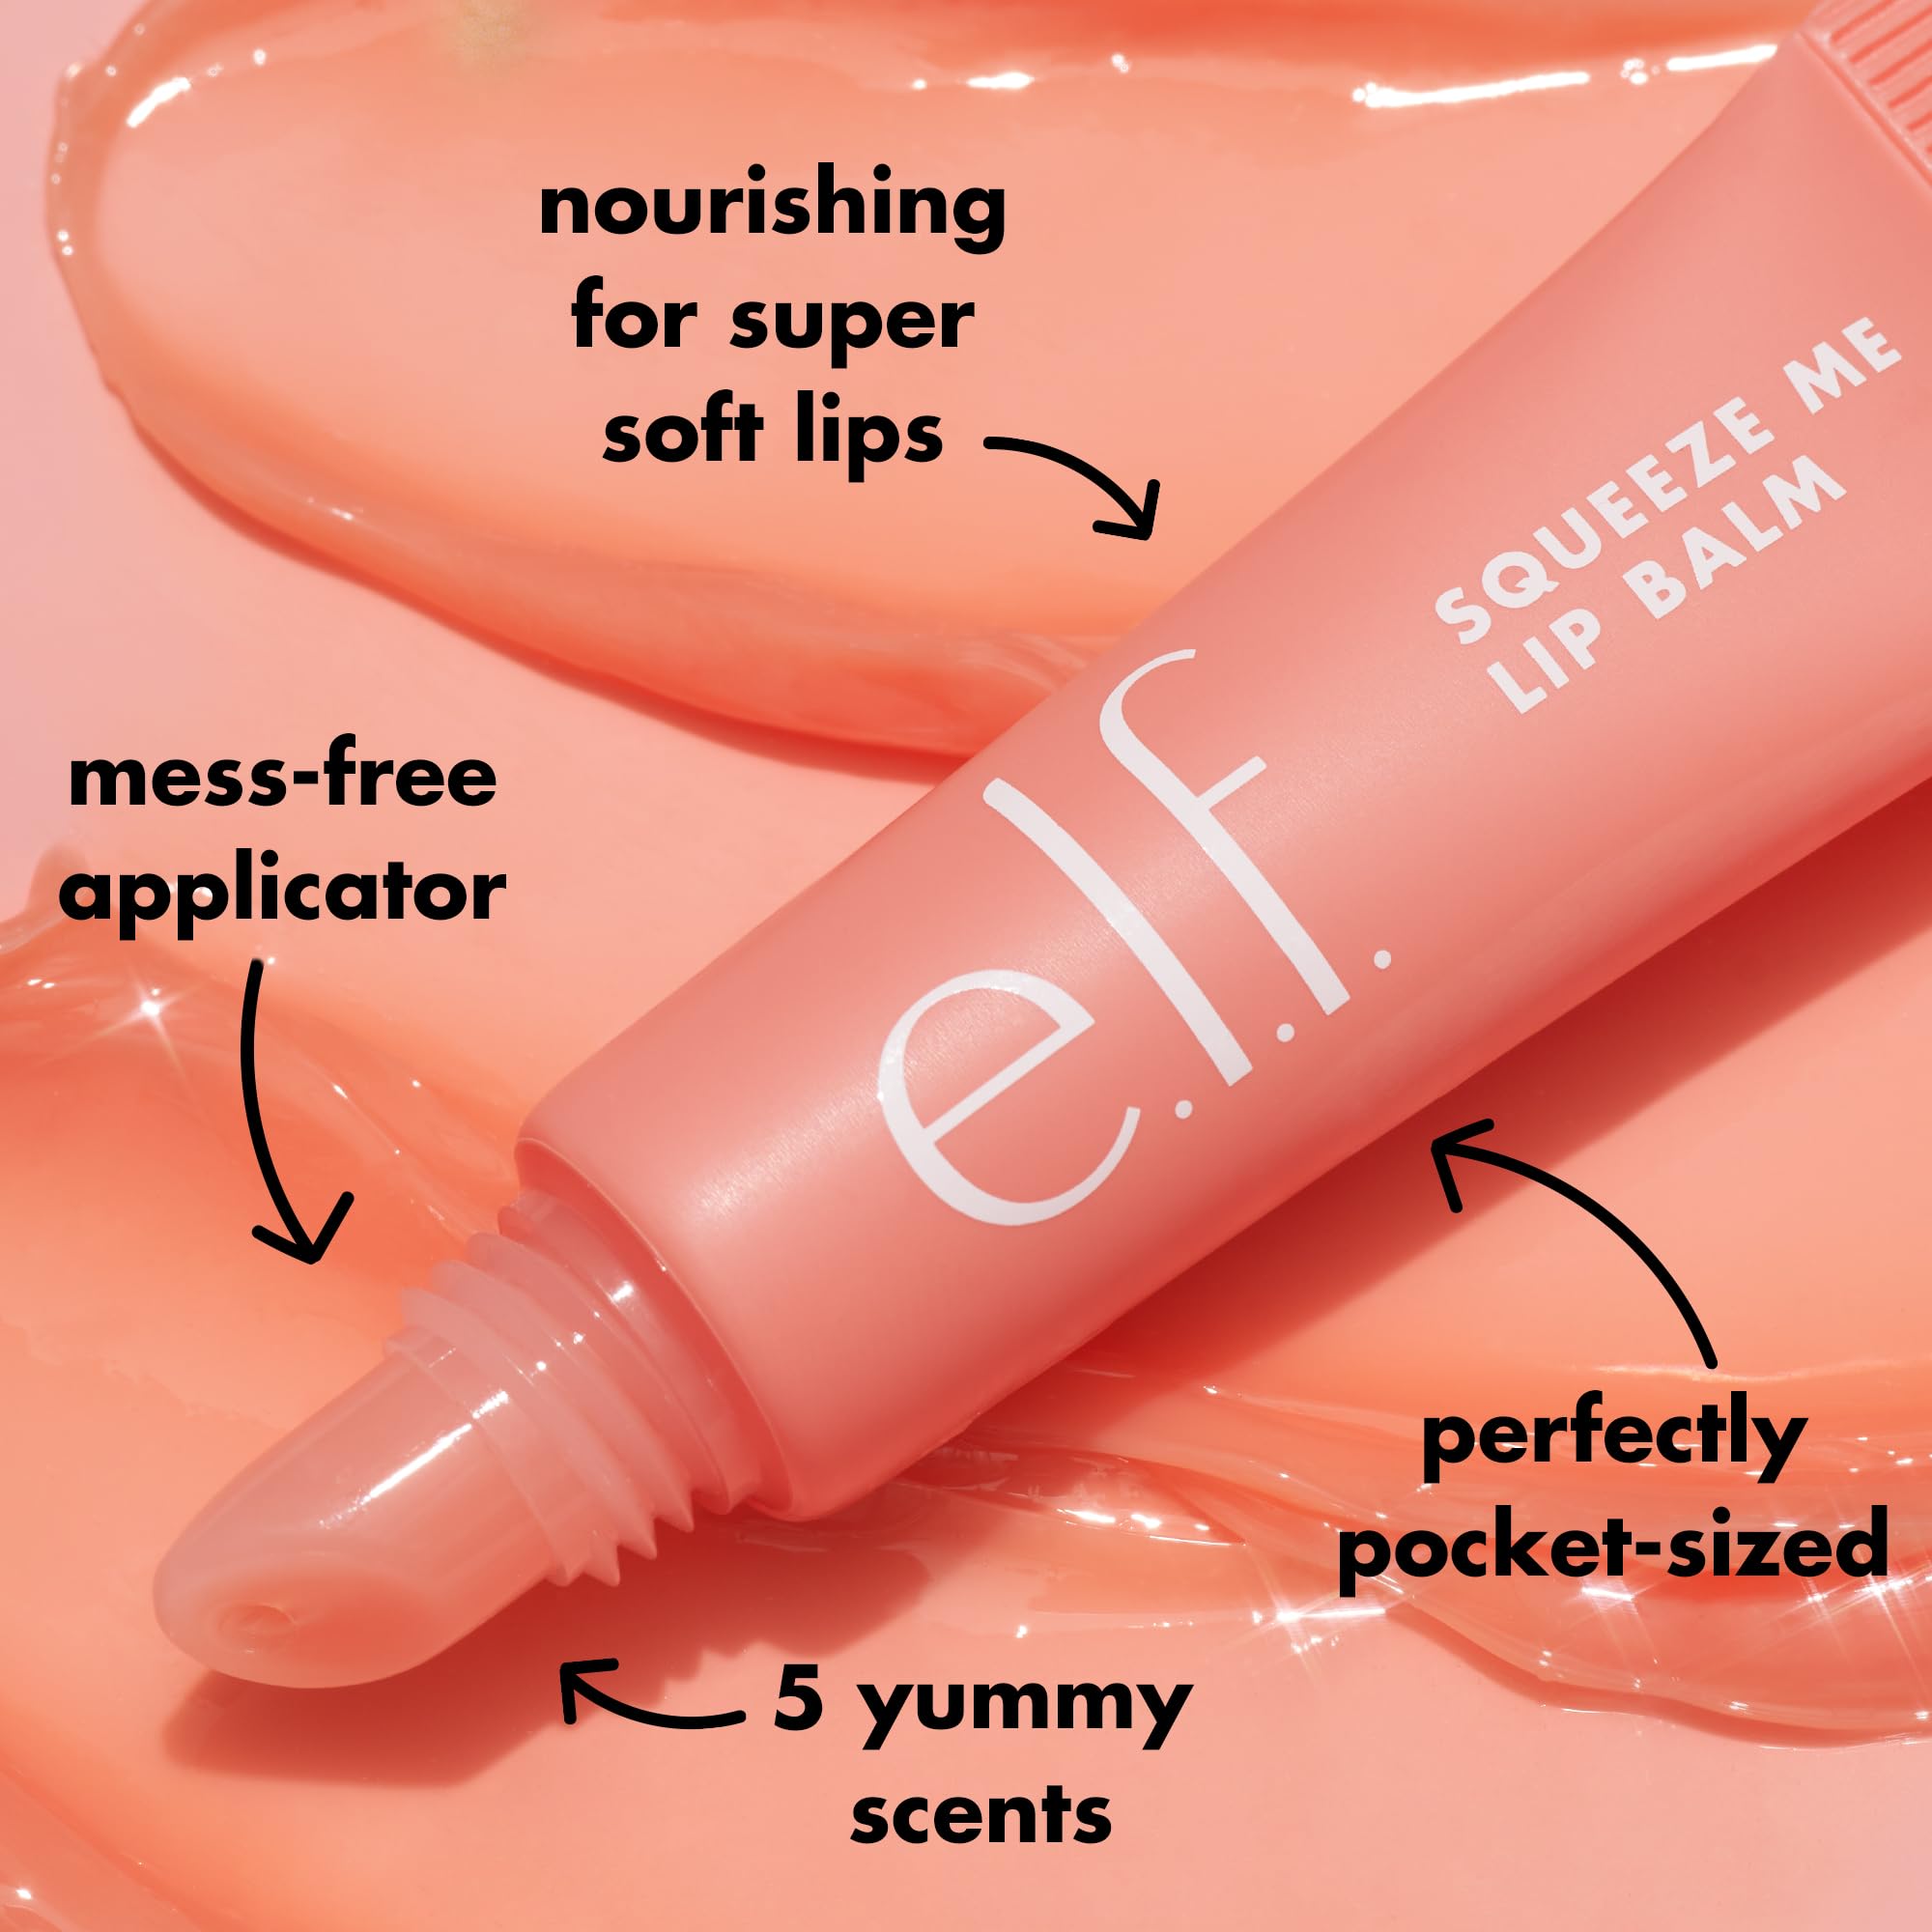 e.l.f. Squeeze Me Lip Balm, Moisturizing Lip Balm For A Sheer Tint Of Color, Infused With Hyaluronic Acid, Vegan & Cruelty-free, Strawberry